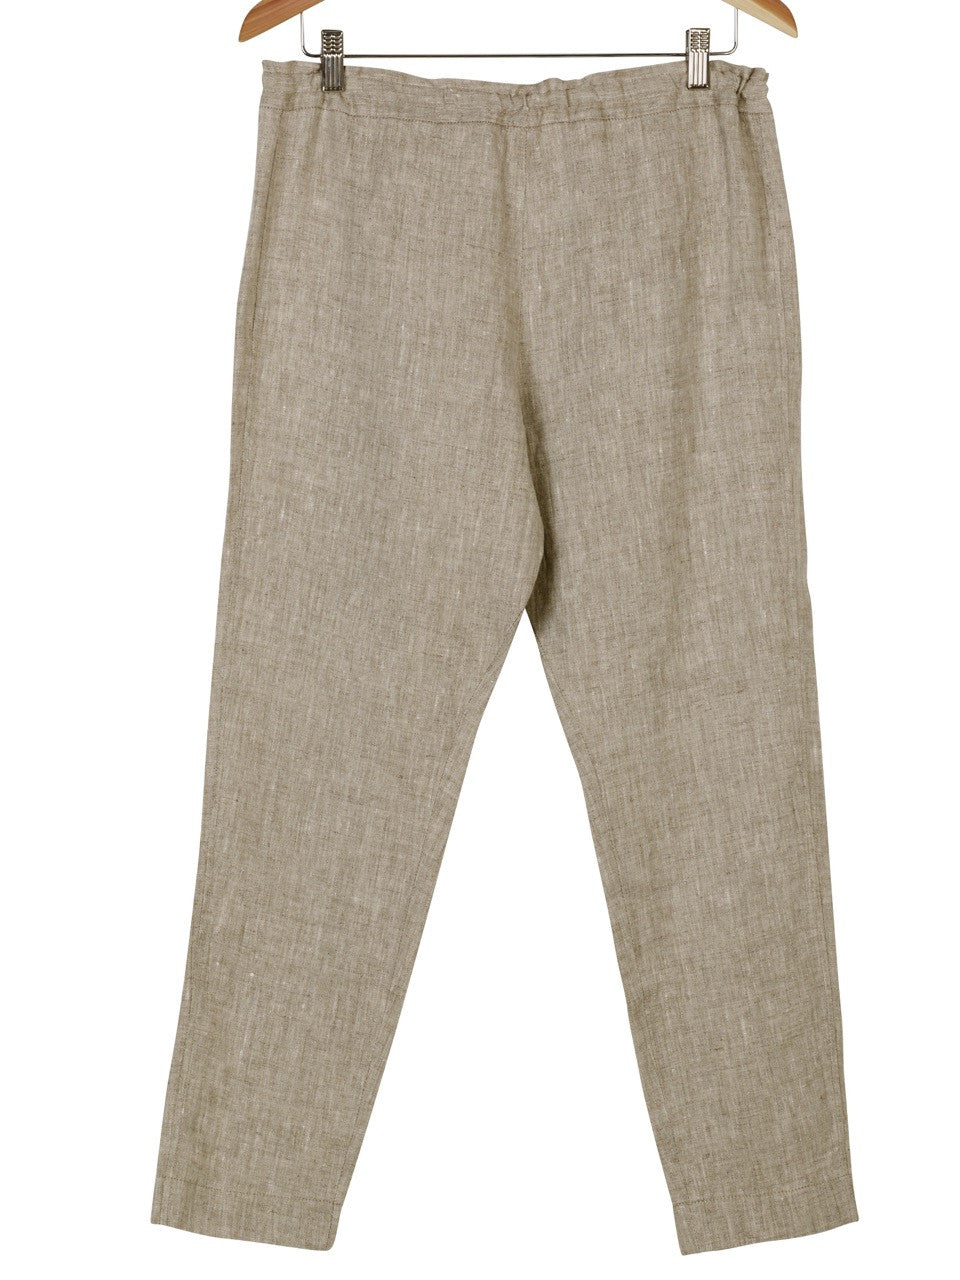 Draw-String Linen Pants, Trousers, Hickman & Bousfield - Hickman & Bousfield, Safari and Travel Clothing